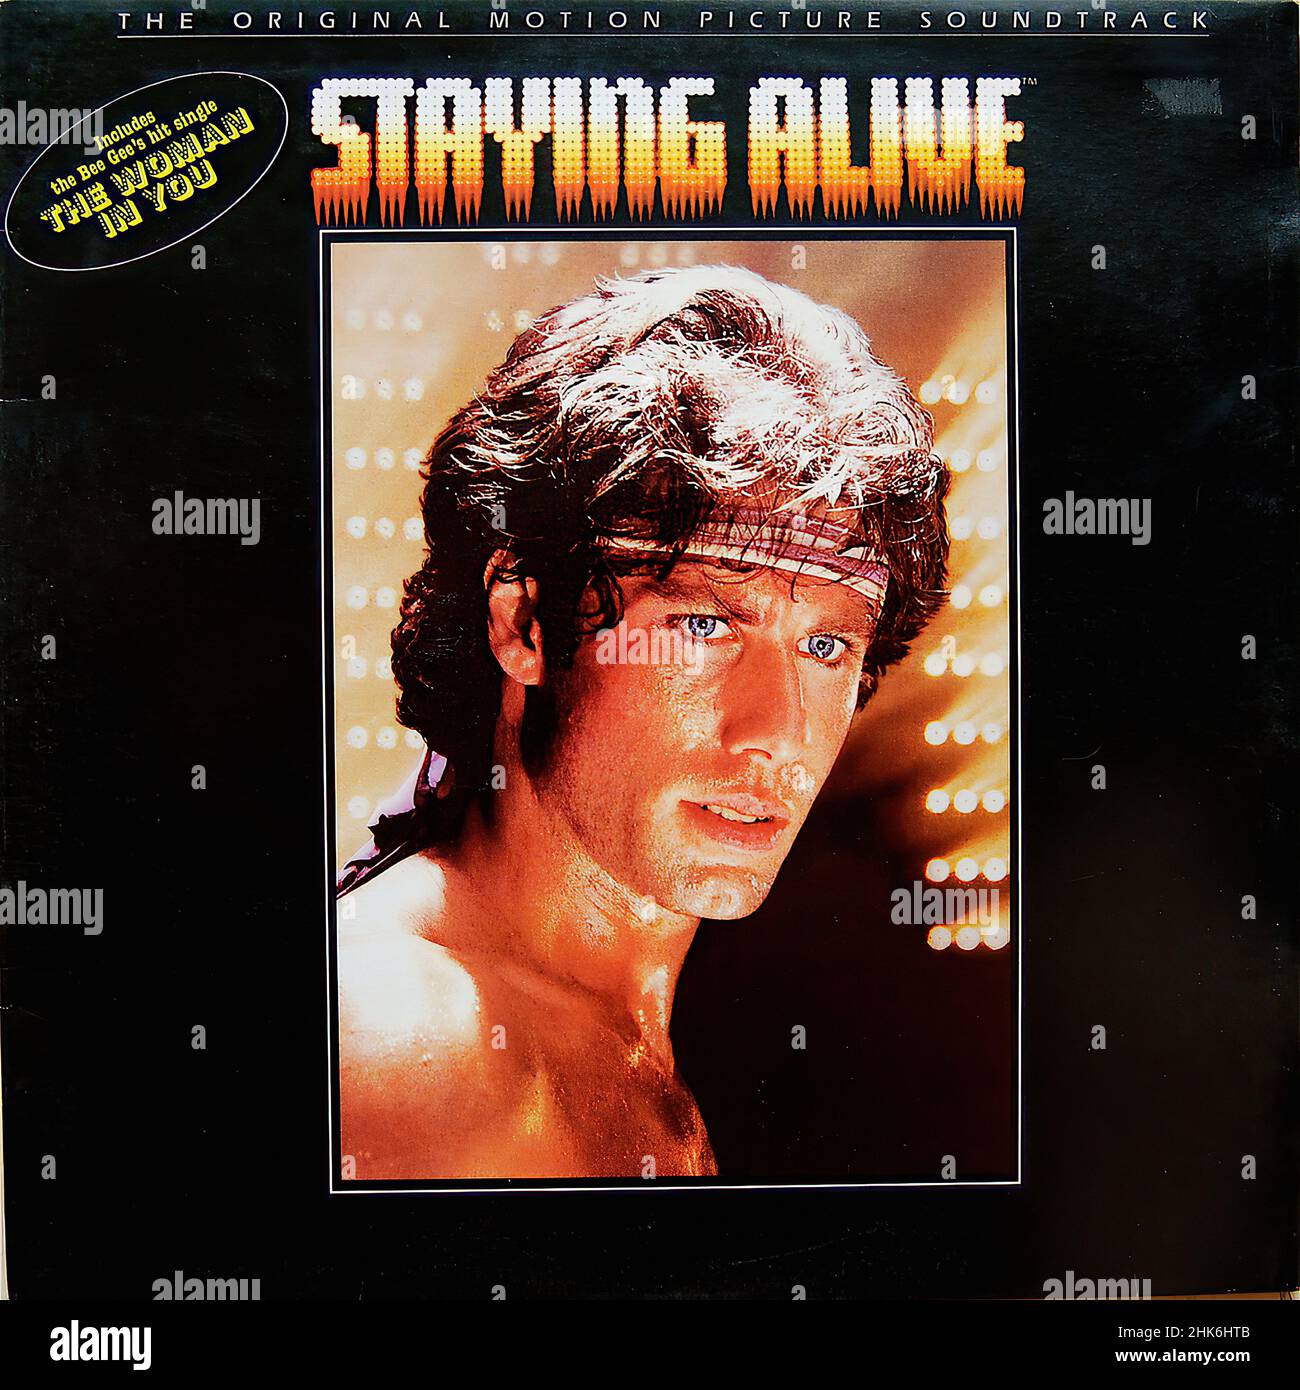 Vintage vinyl record cover -  Movie Soundtrack - Staying Alive - Front Stock Photo